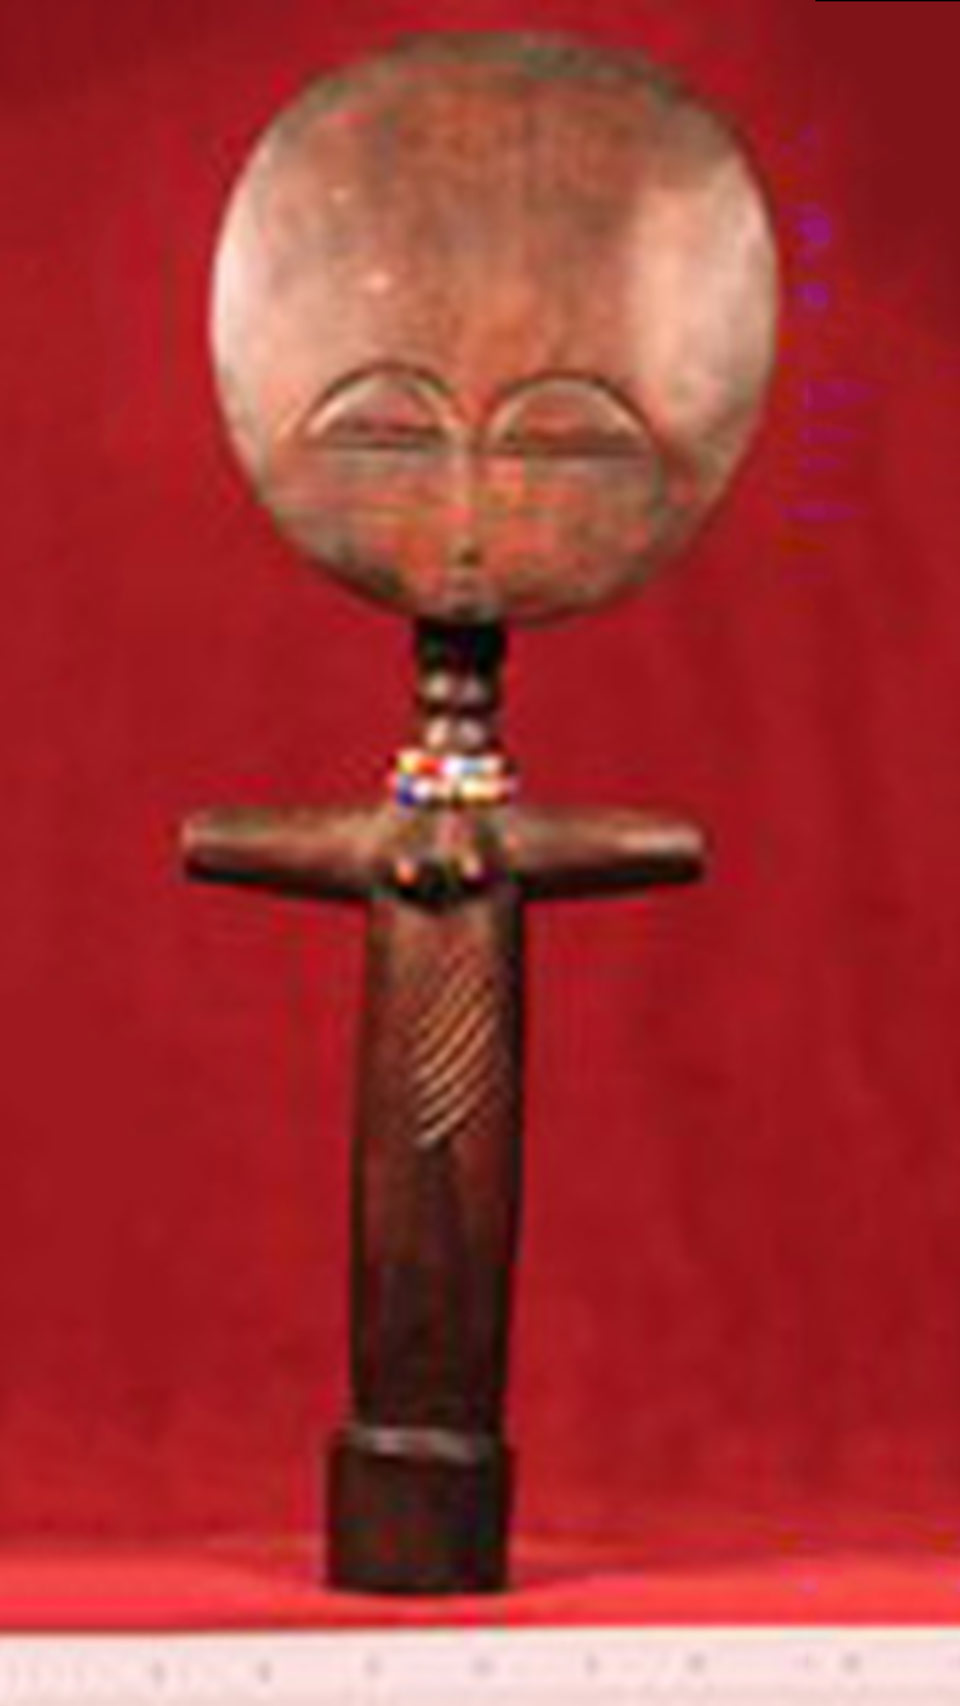 blurred image of a wooden African doll